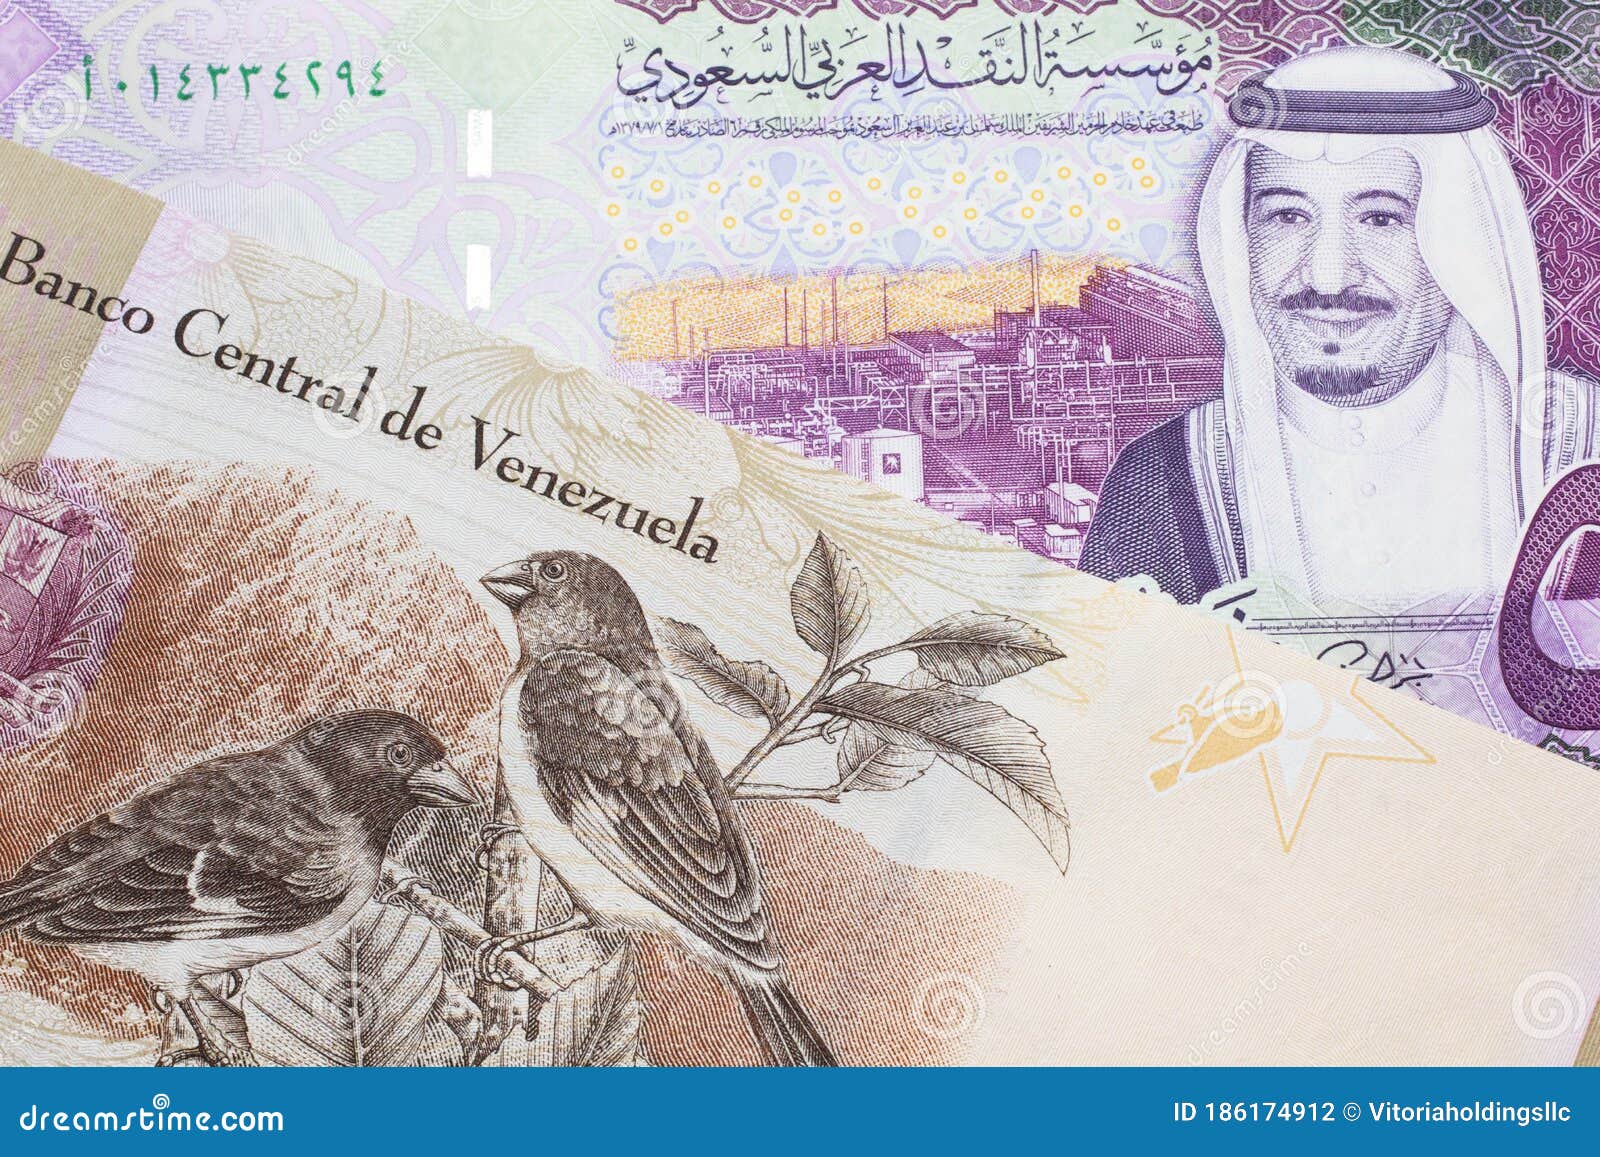 a bolivar note from venezuela with a five riyal note from saudi arabia